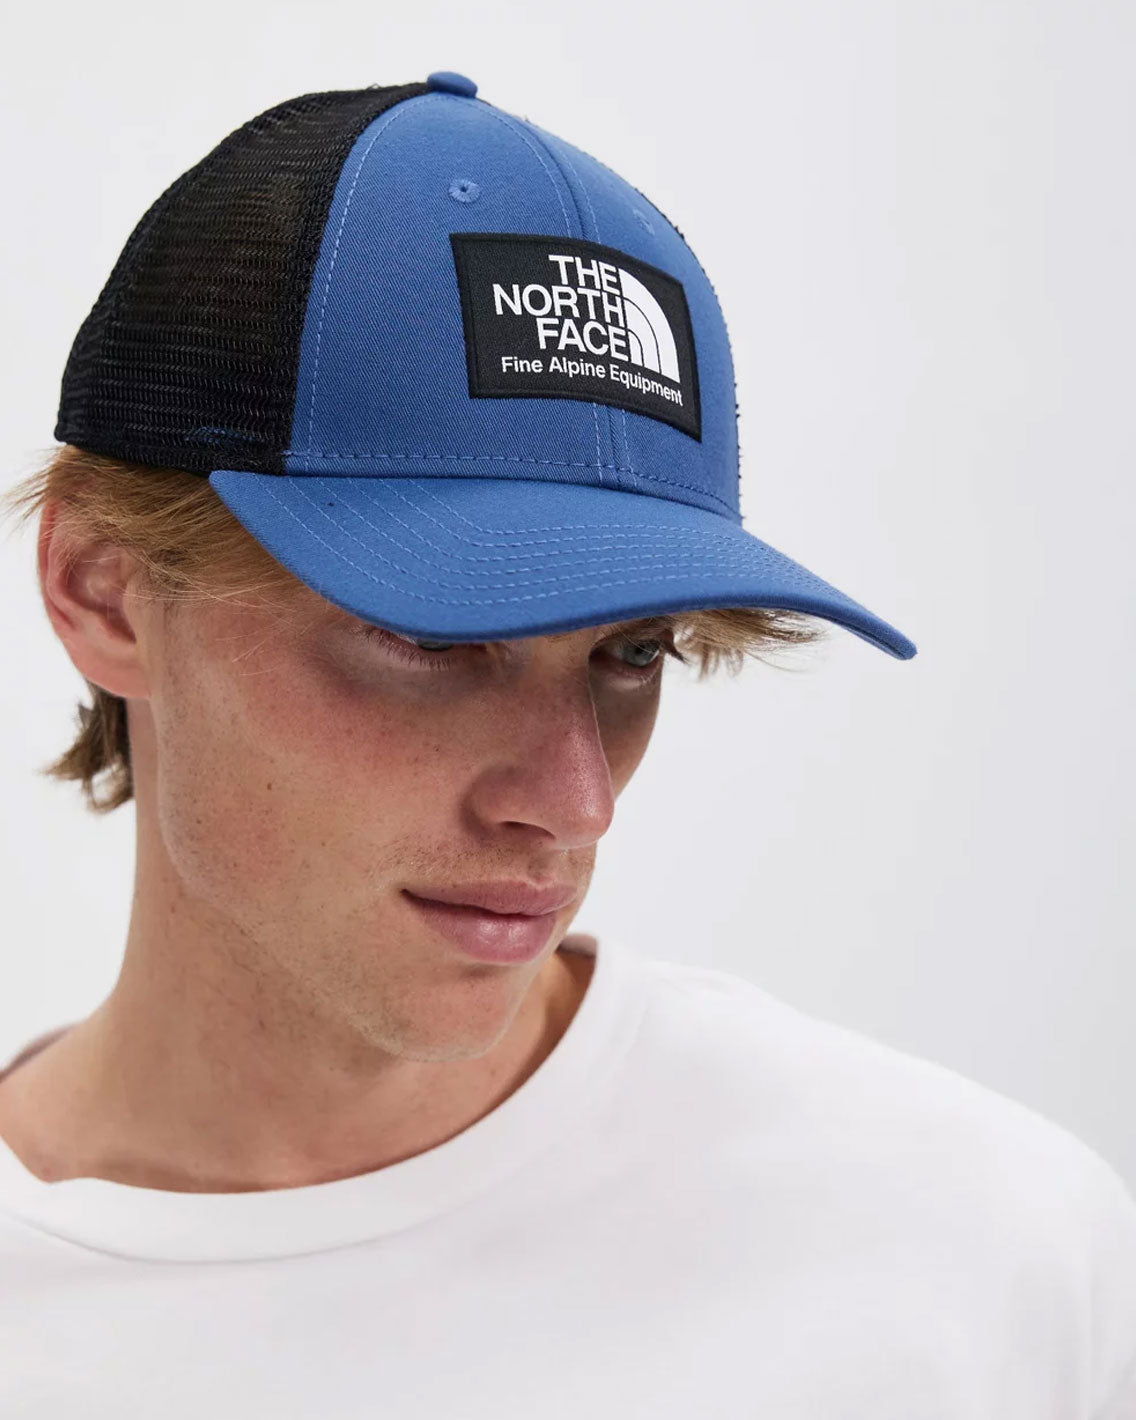 The North Face - Mudder Trucker Hat - Shady Blue